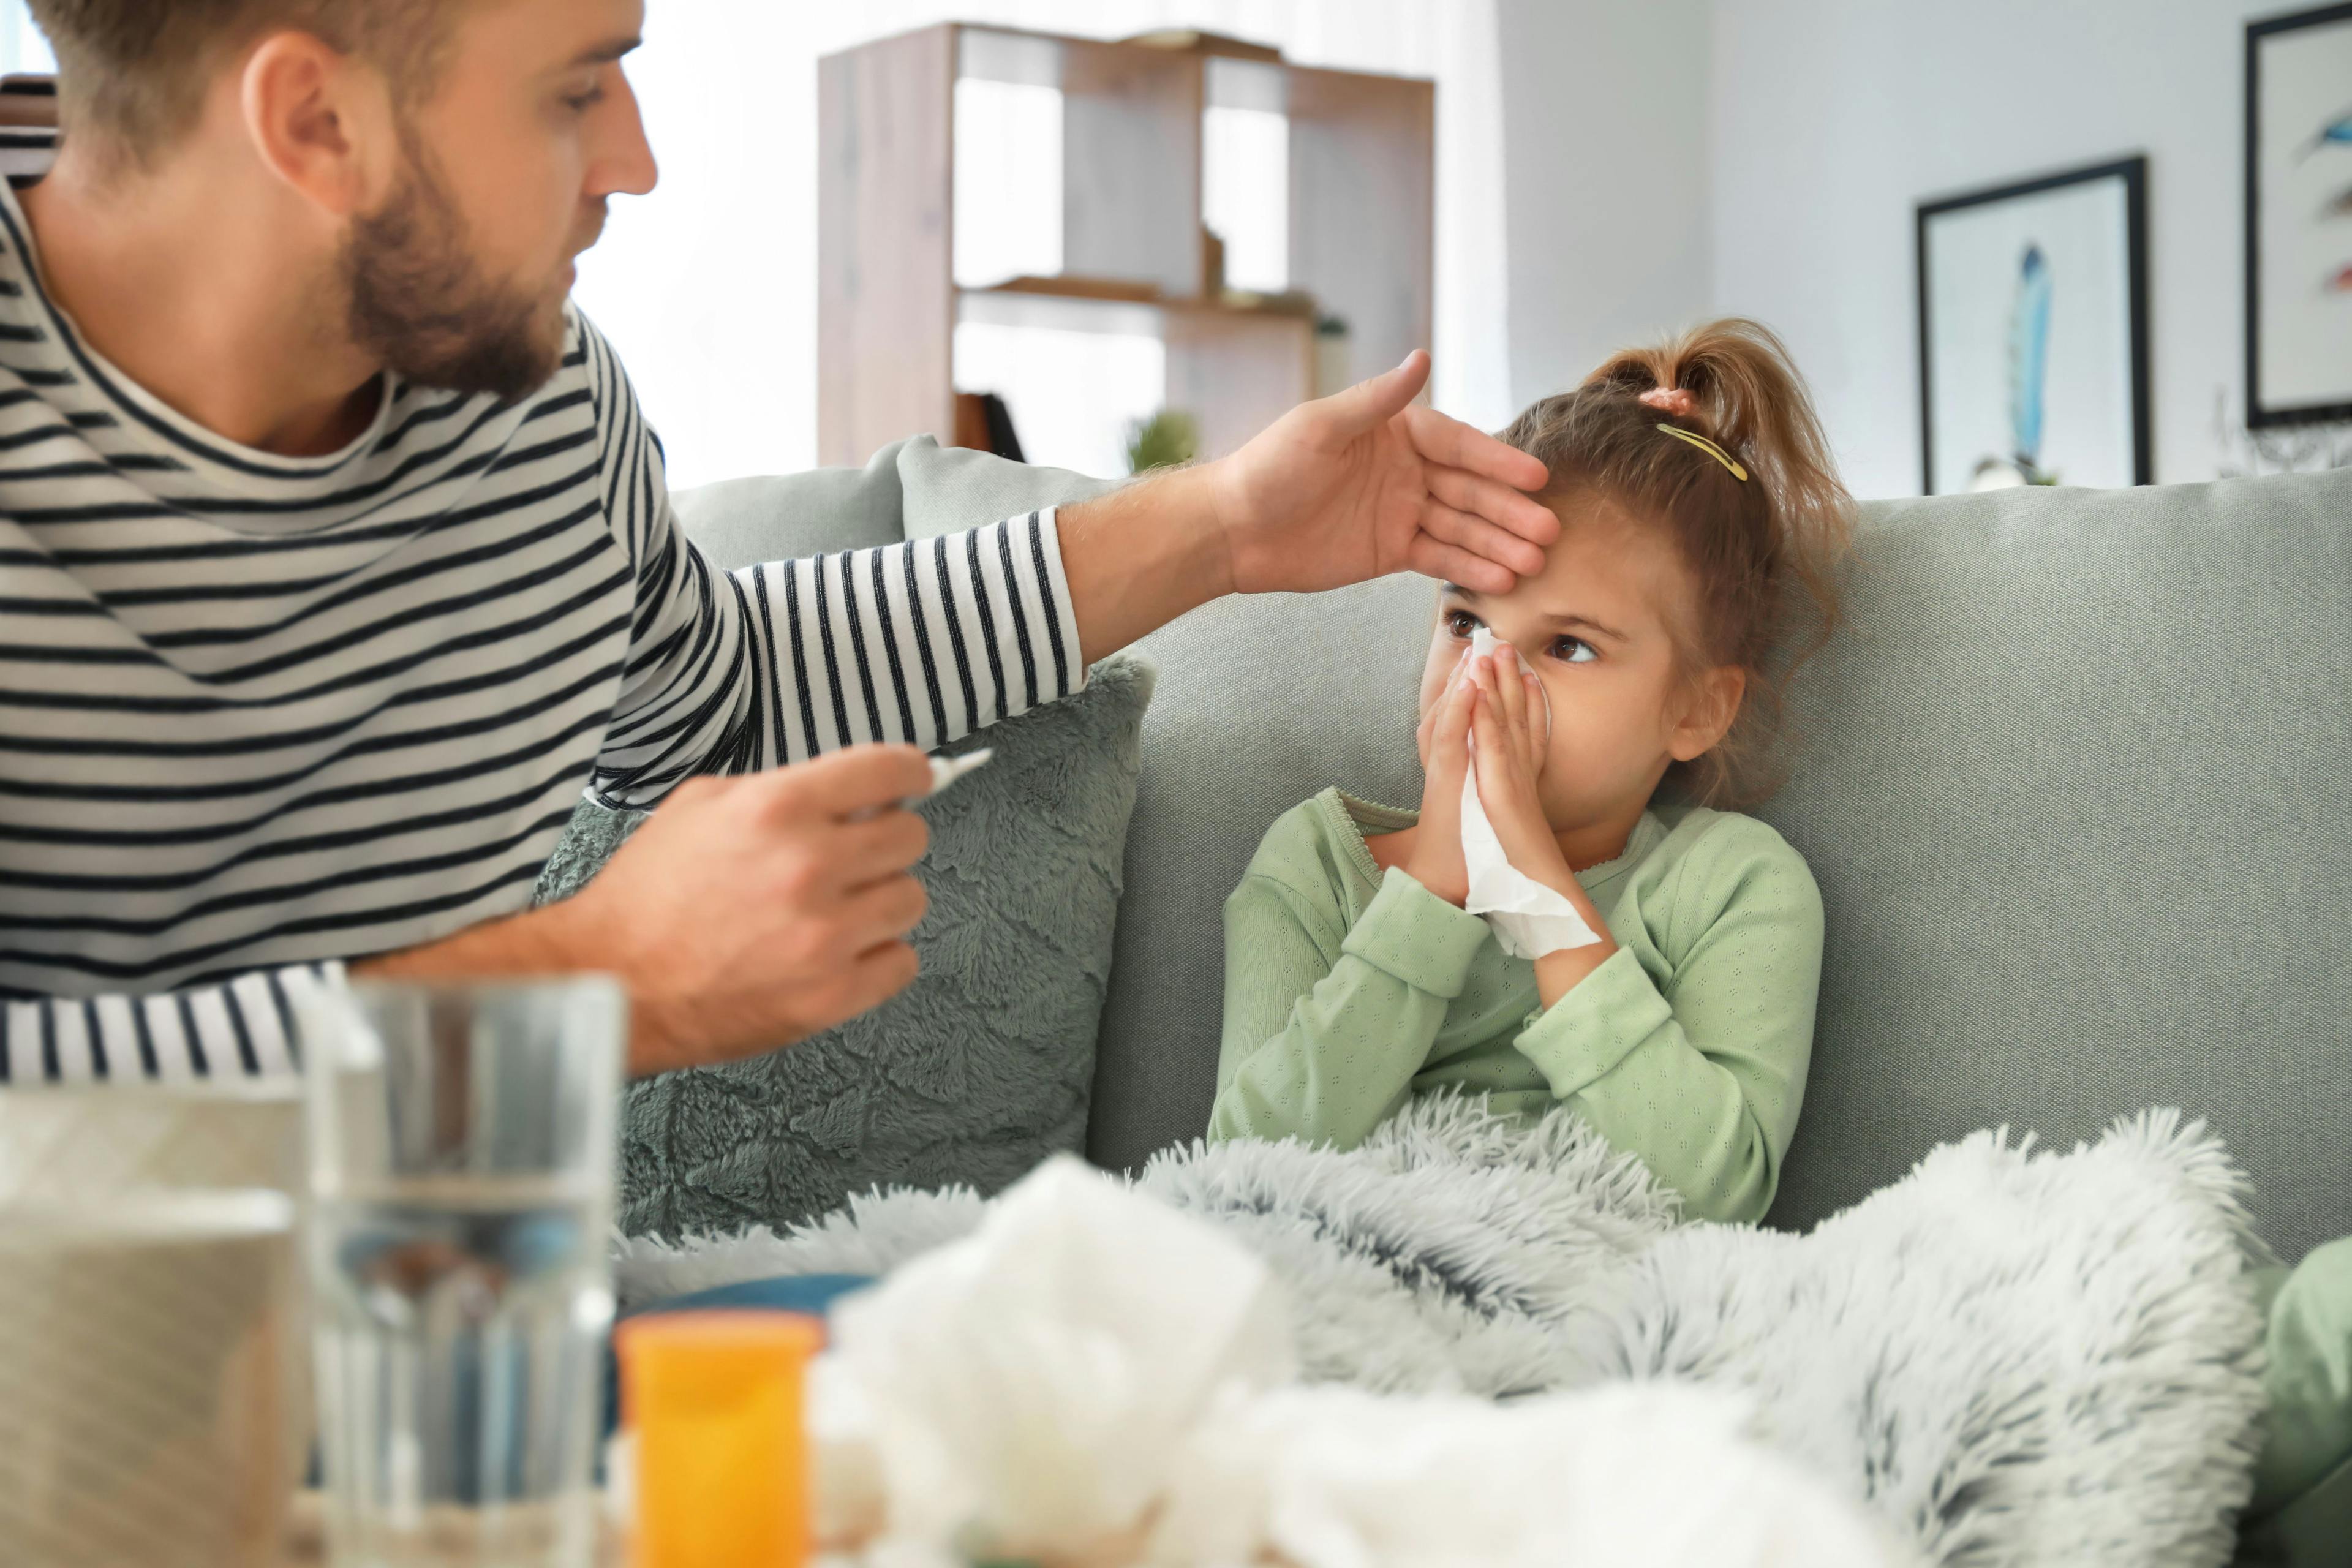 Catching a Common Cold Gives Children COVID-19 Immunity